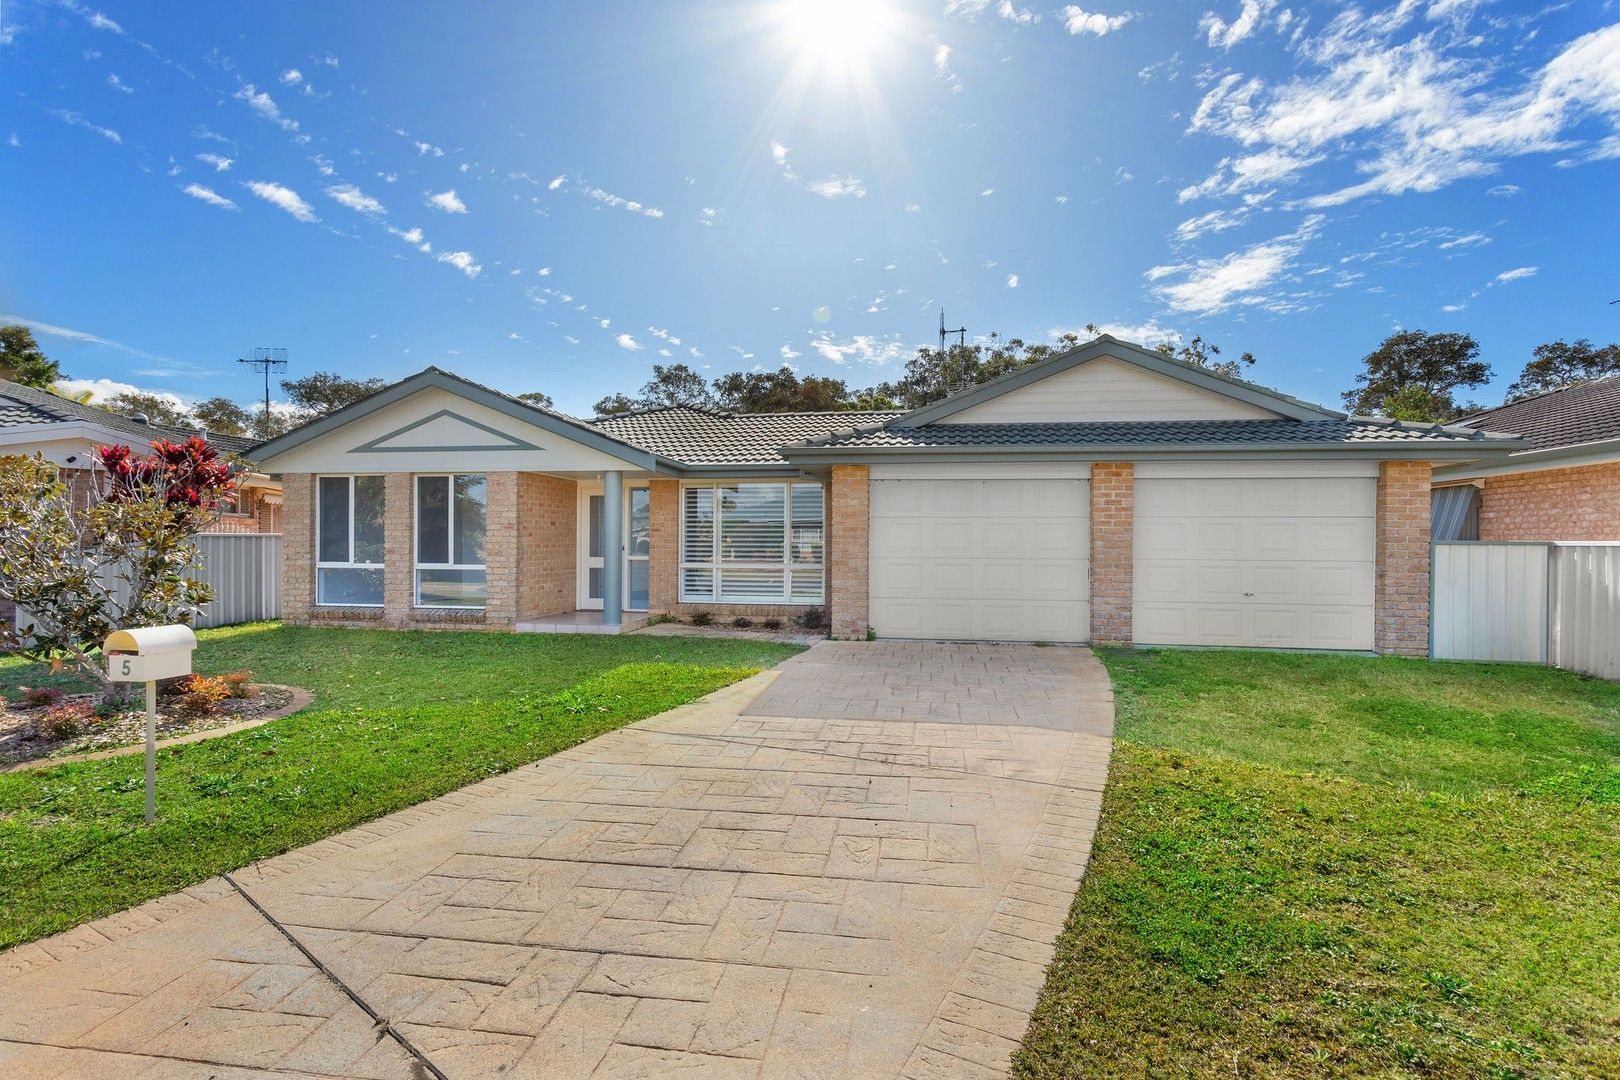 5 MICHAELA PLACE, Forster NSW 2428, Image 0